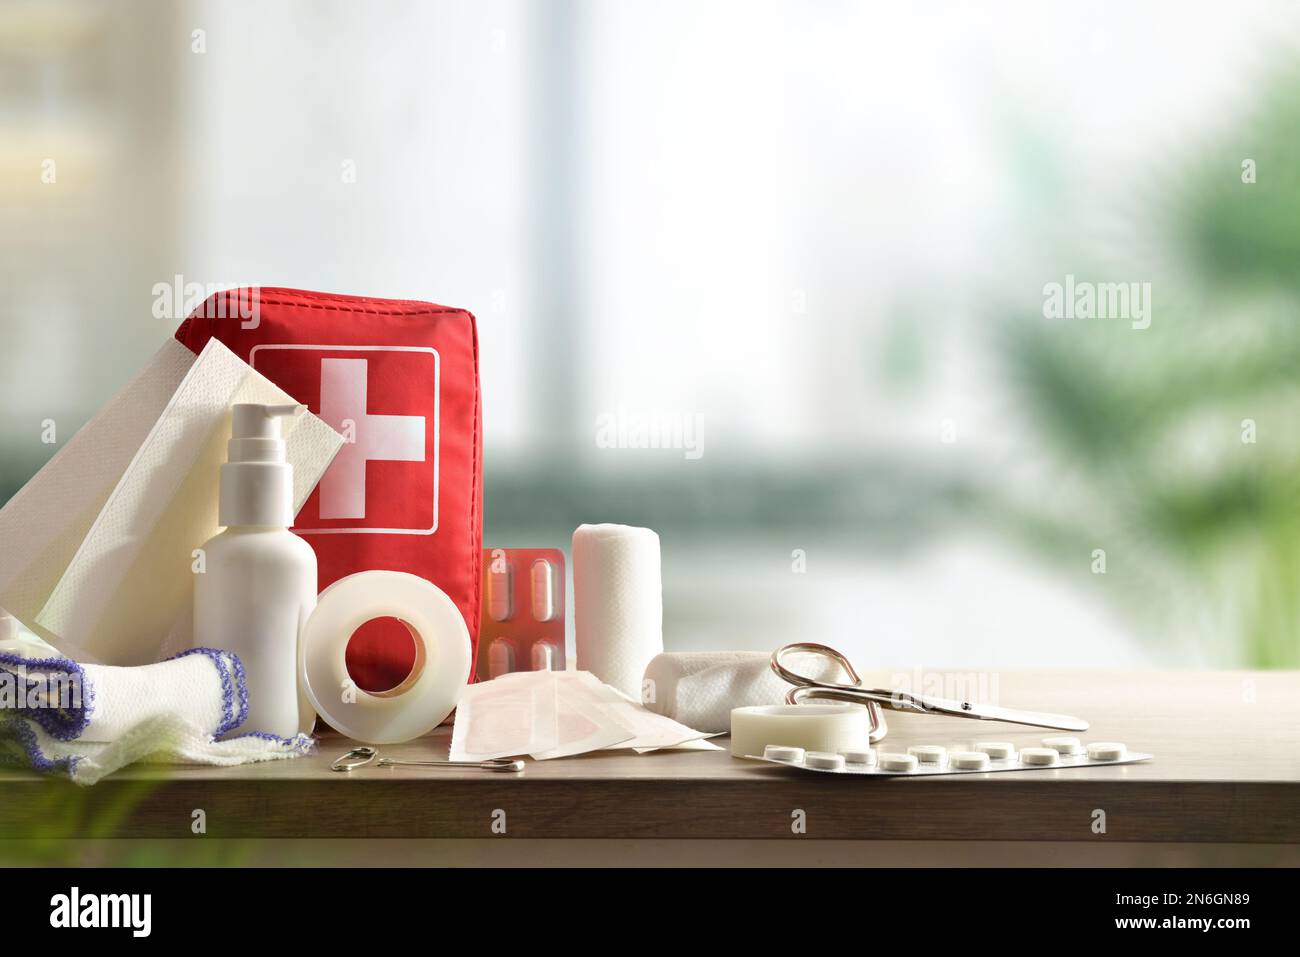 Emergency home kit on wooden table and warm room background. Horizontal composition. Front view. Stock Photo